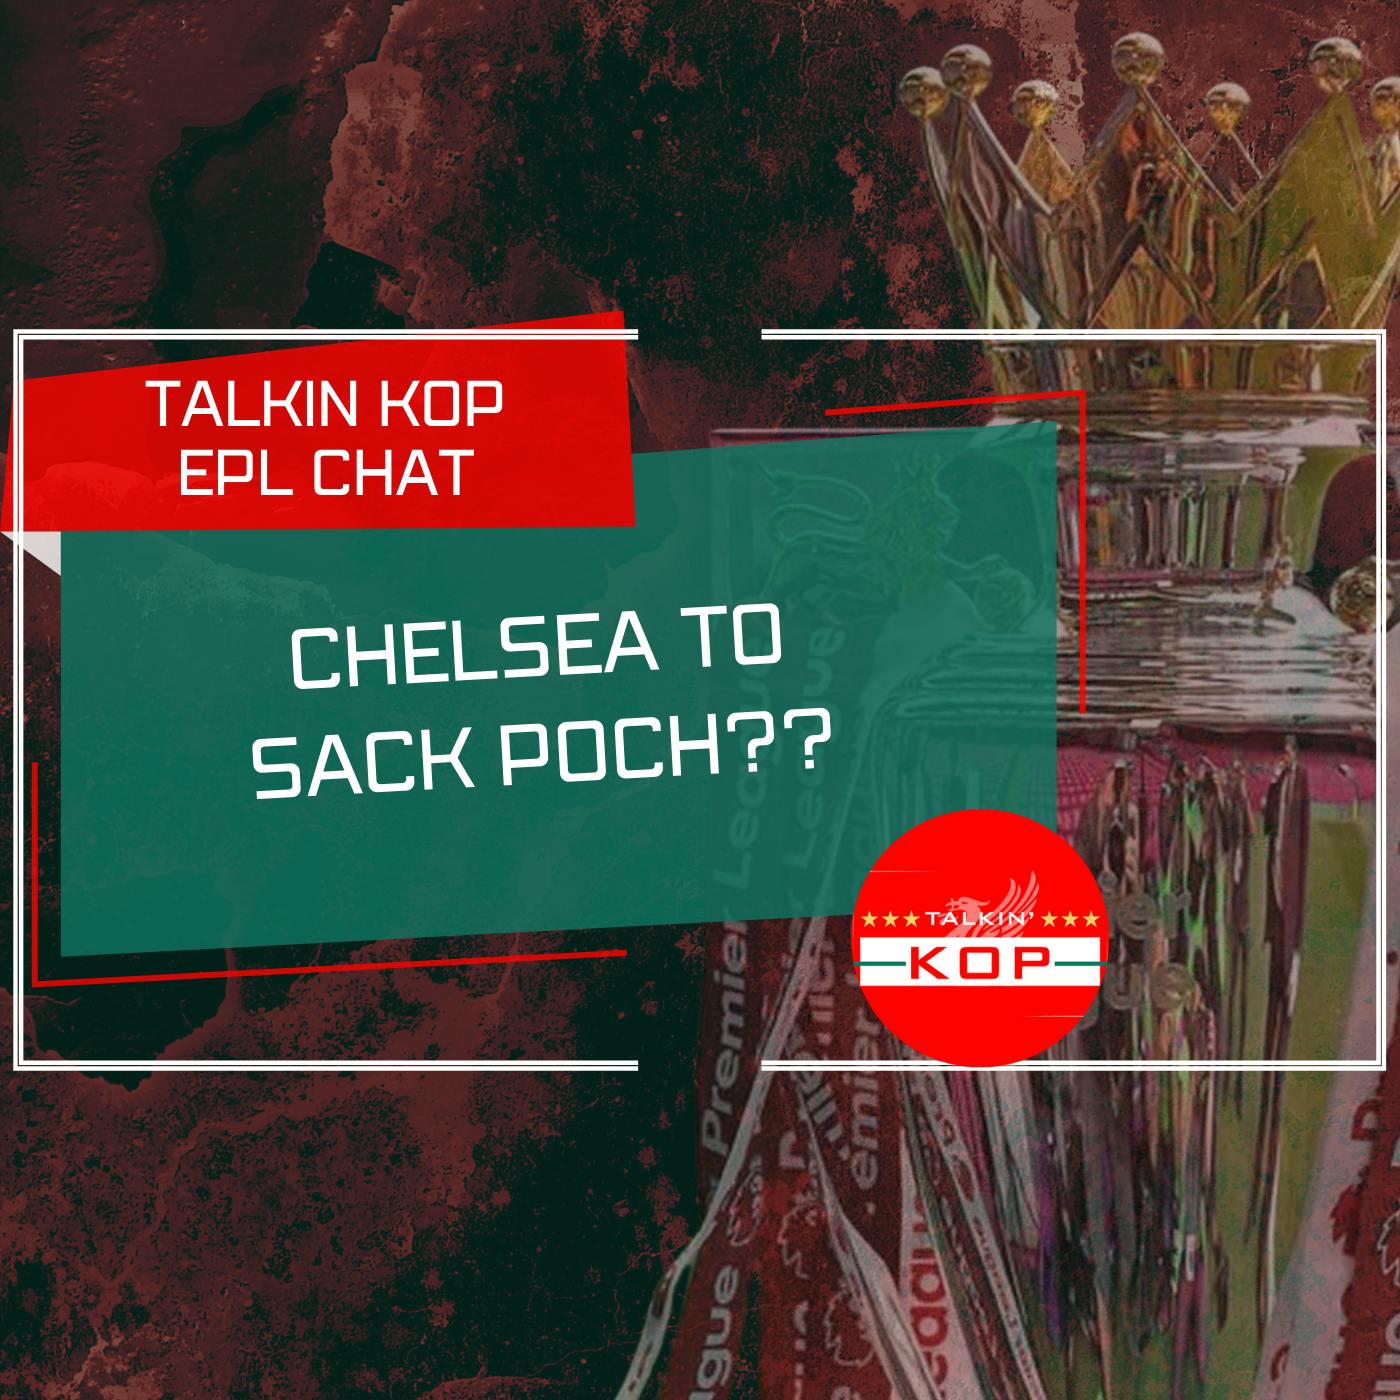 Chelsea To Sack Poch? | EPL Chat